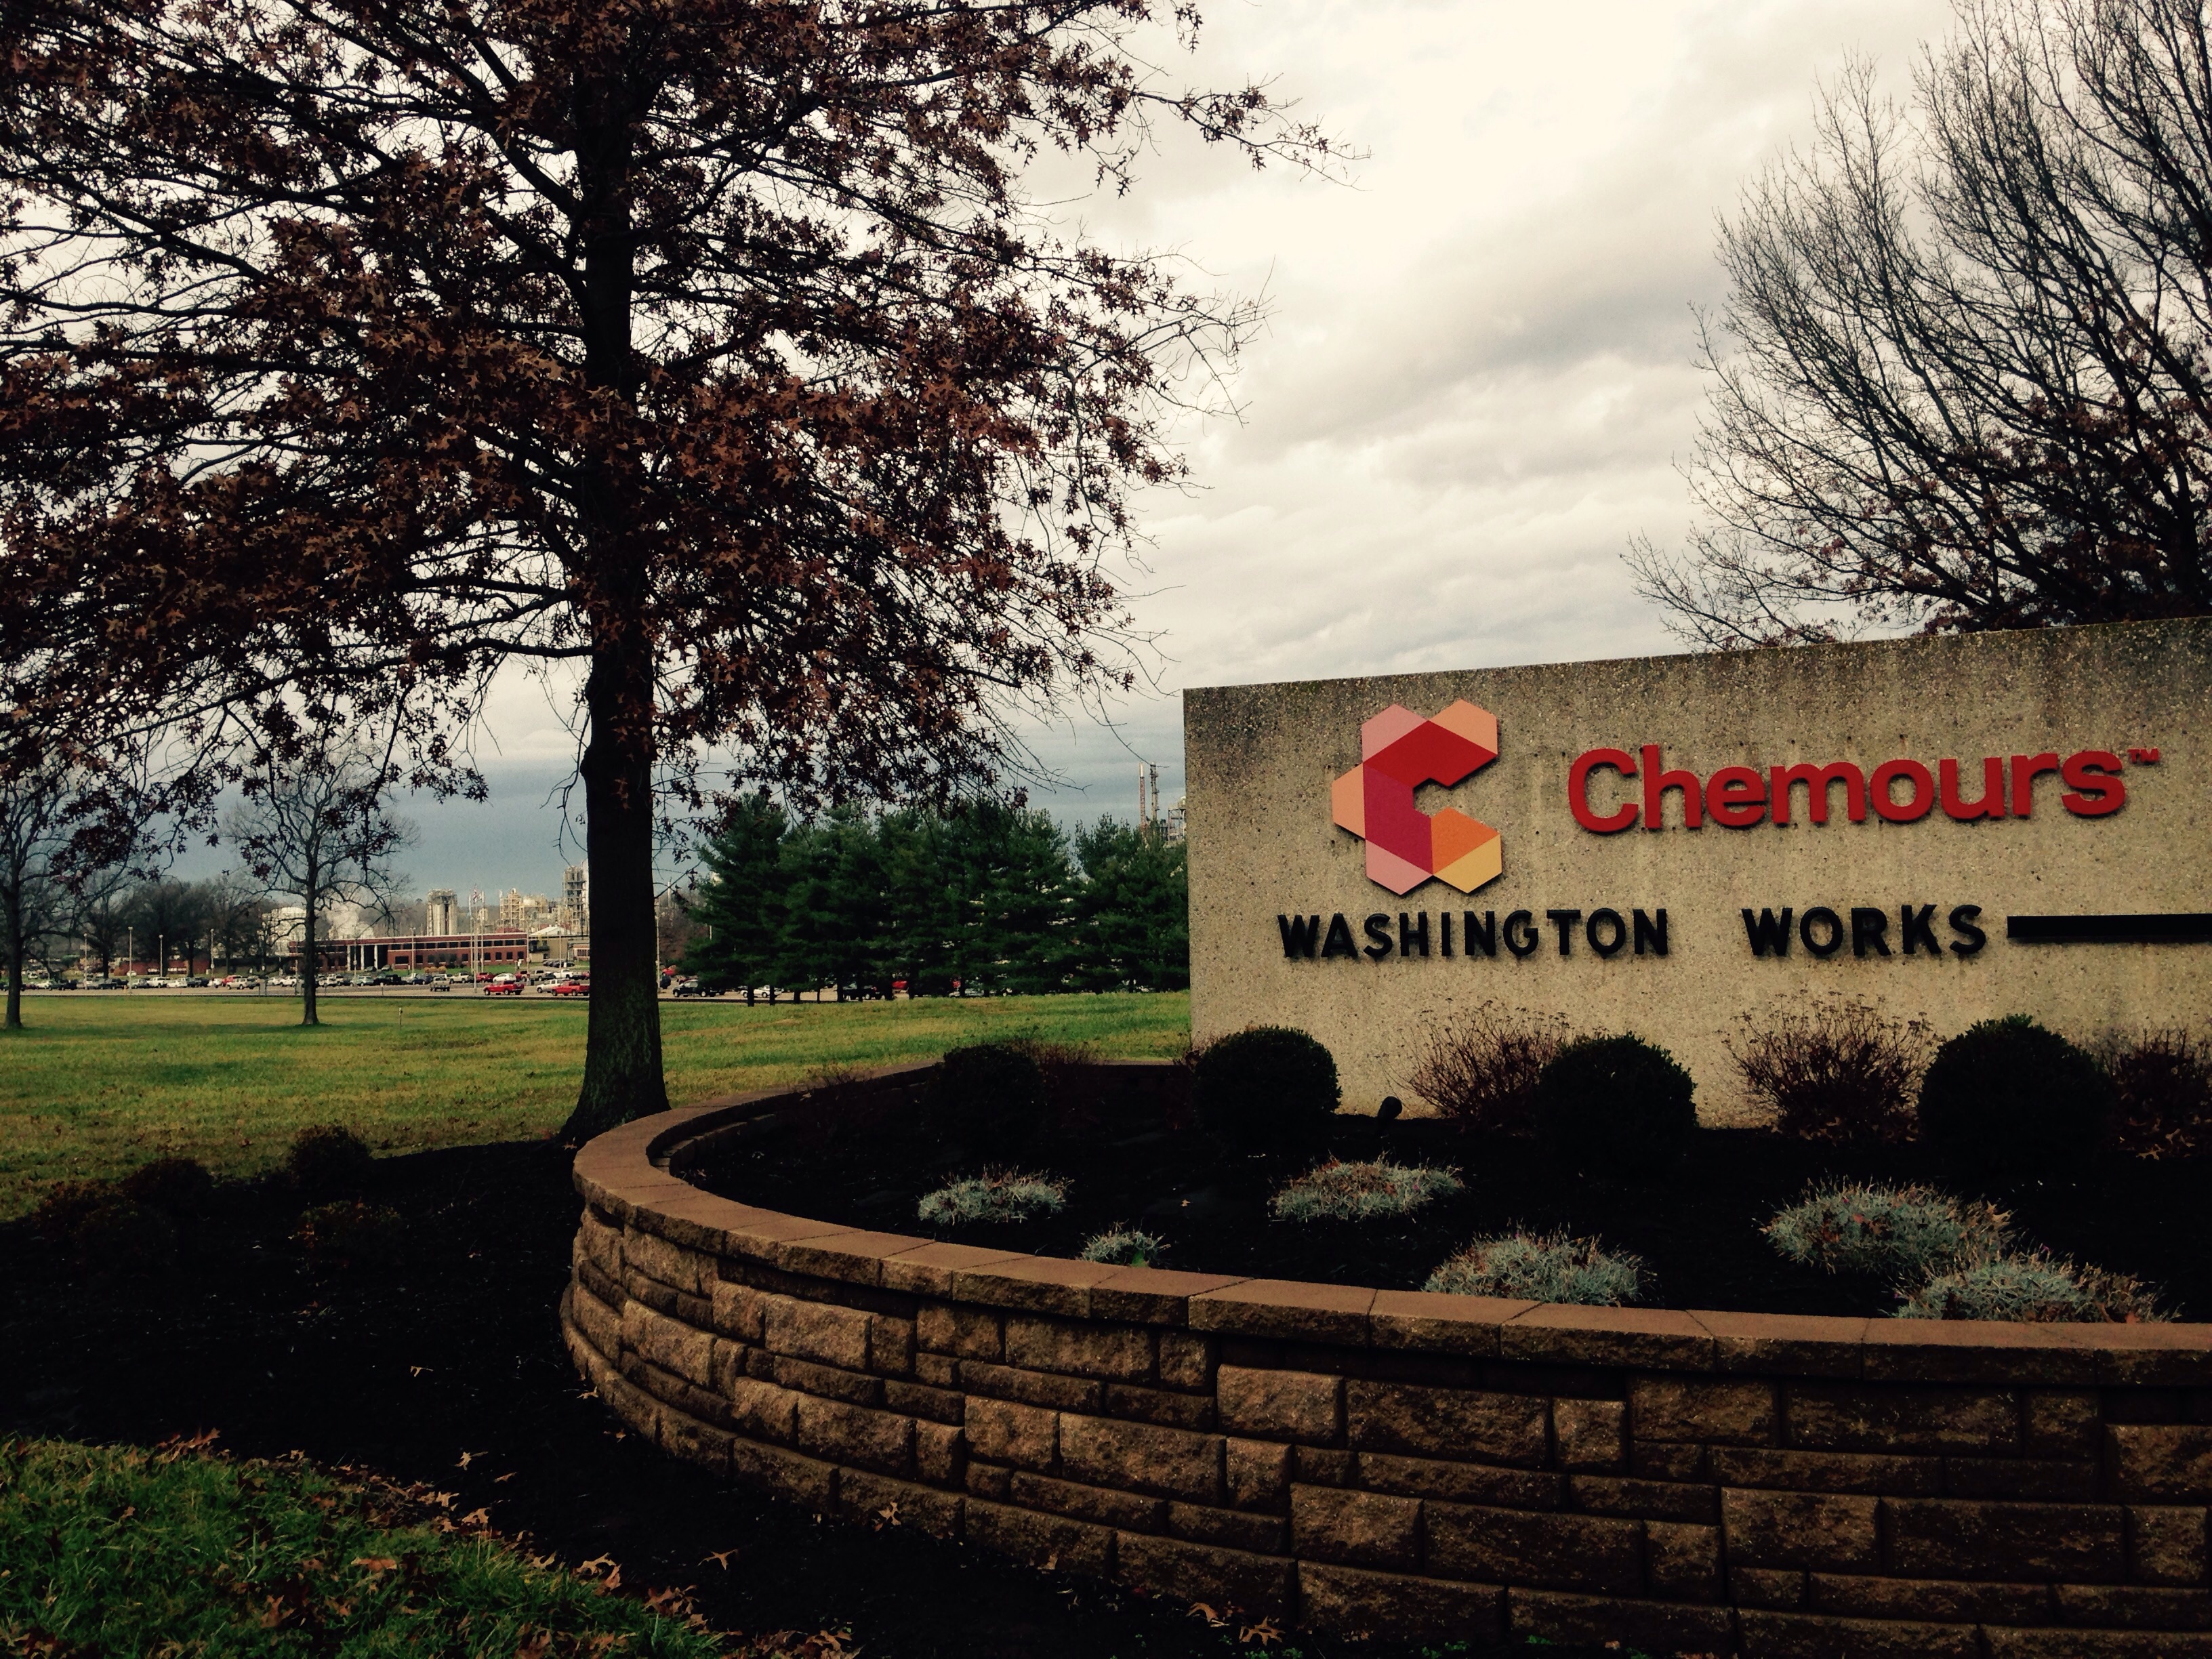 The Chemours facility, formerly the Dupont company's site, in Washington, West Virginia.